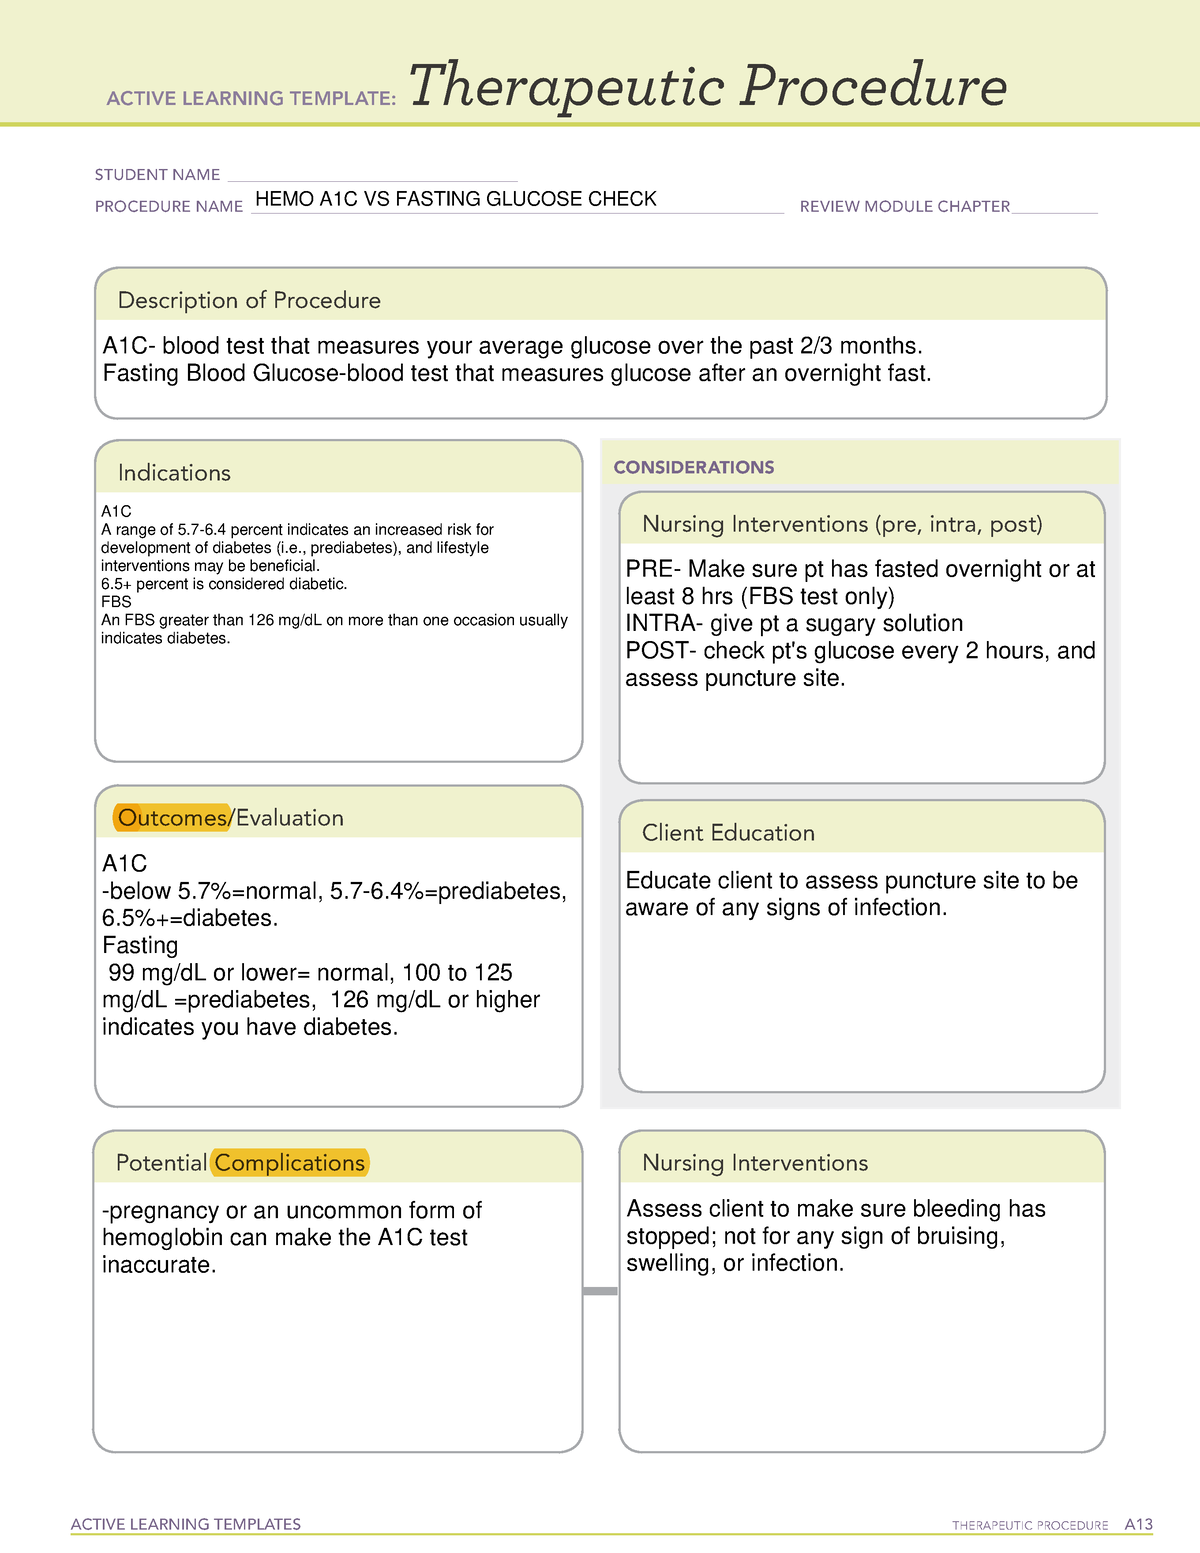 Fasting Glucose Check ATI Template ACTIVE LEARNING TEMPLATES